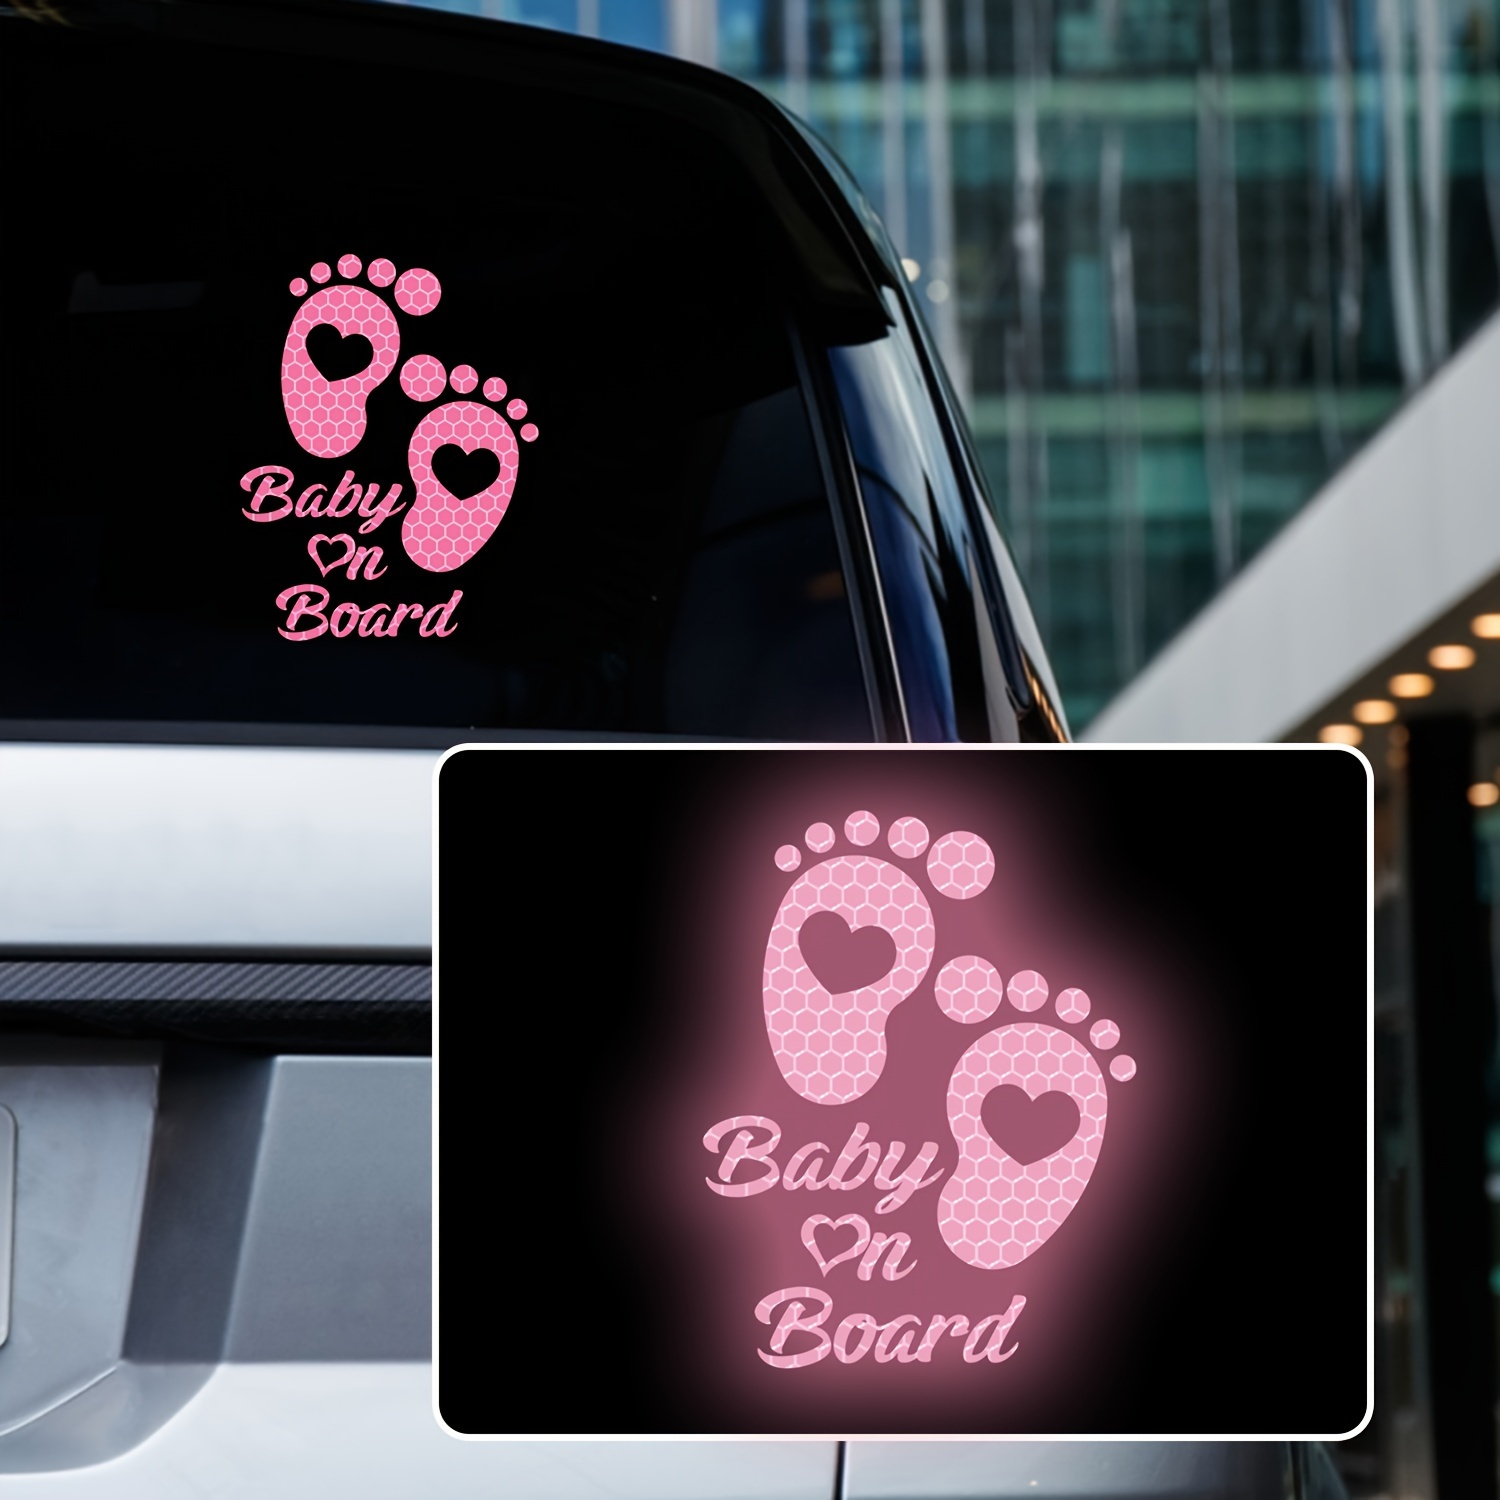 

Reflective Baby On Board Car Decal - Waterproof Vinyl Cartoon Footprint Safety Warning Sticker For Bumper And Window - High Visibility Nighttime Reflective Adhesive Sign For Vehicle Security